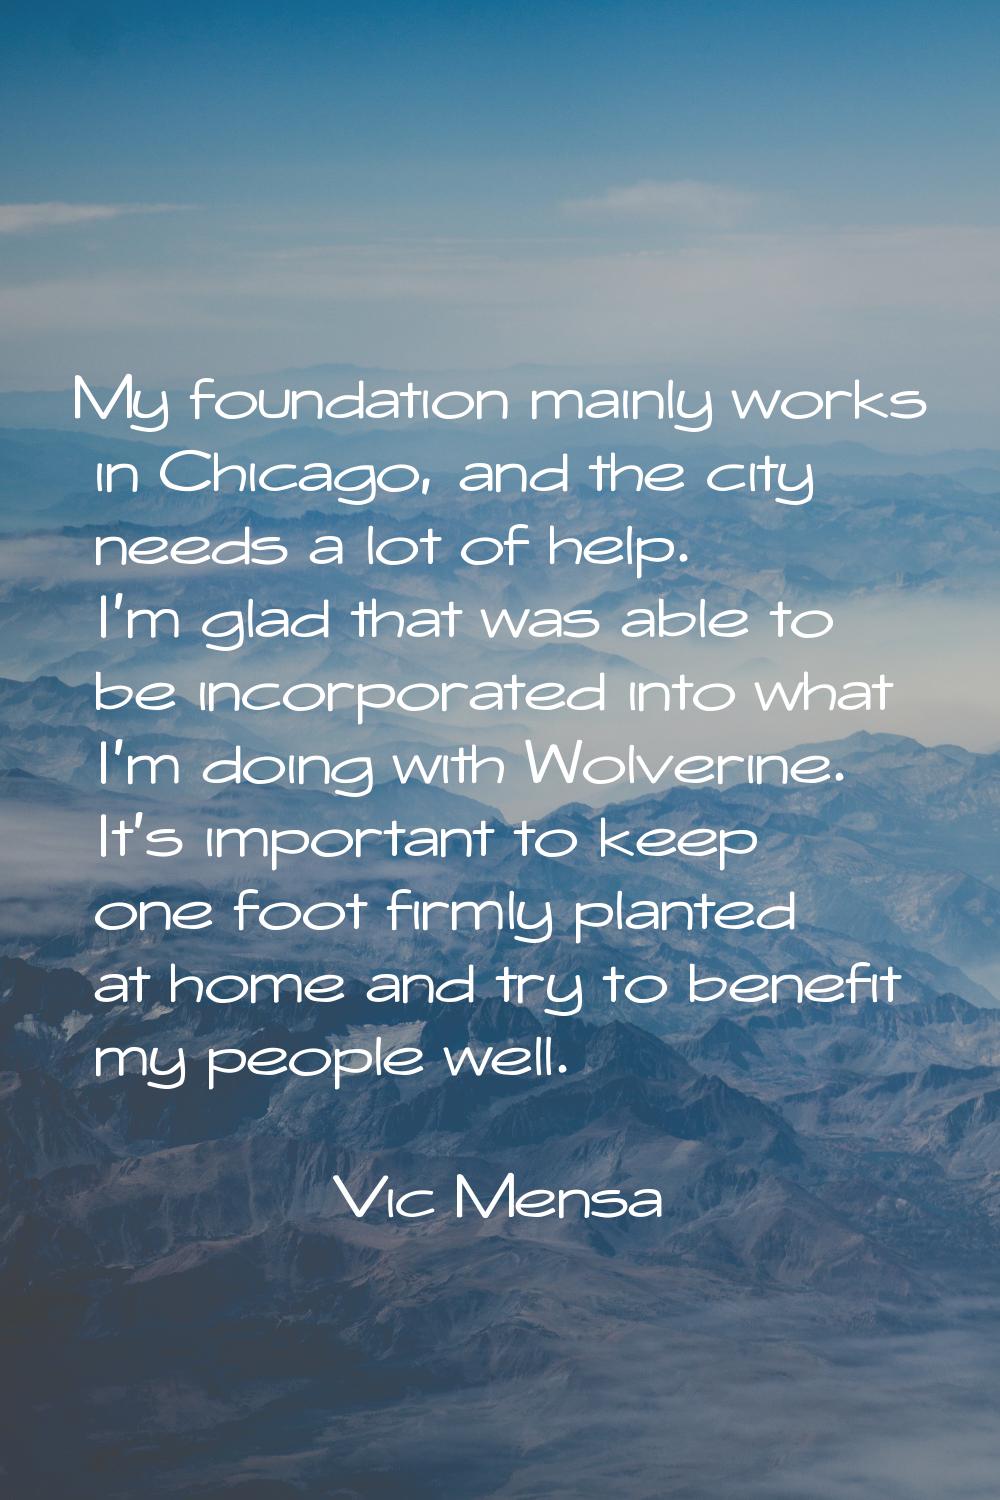 My foundation mainly works in Chicago, and the city needs a lot of help. I'm glad that was able to 